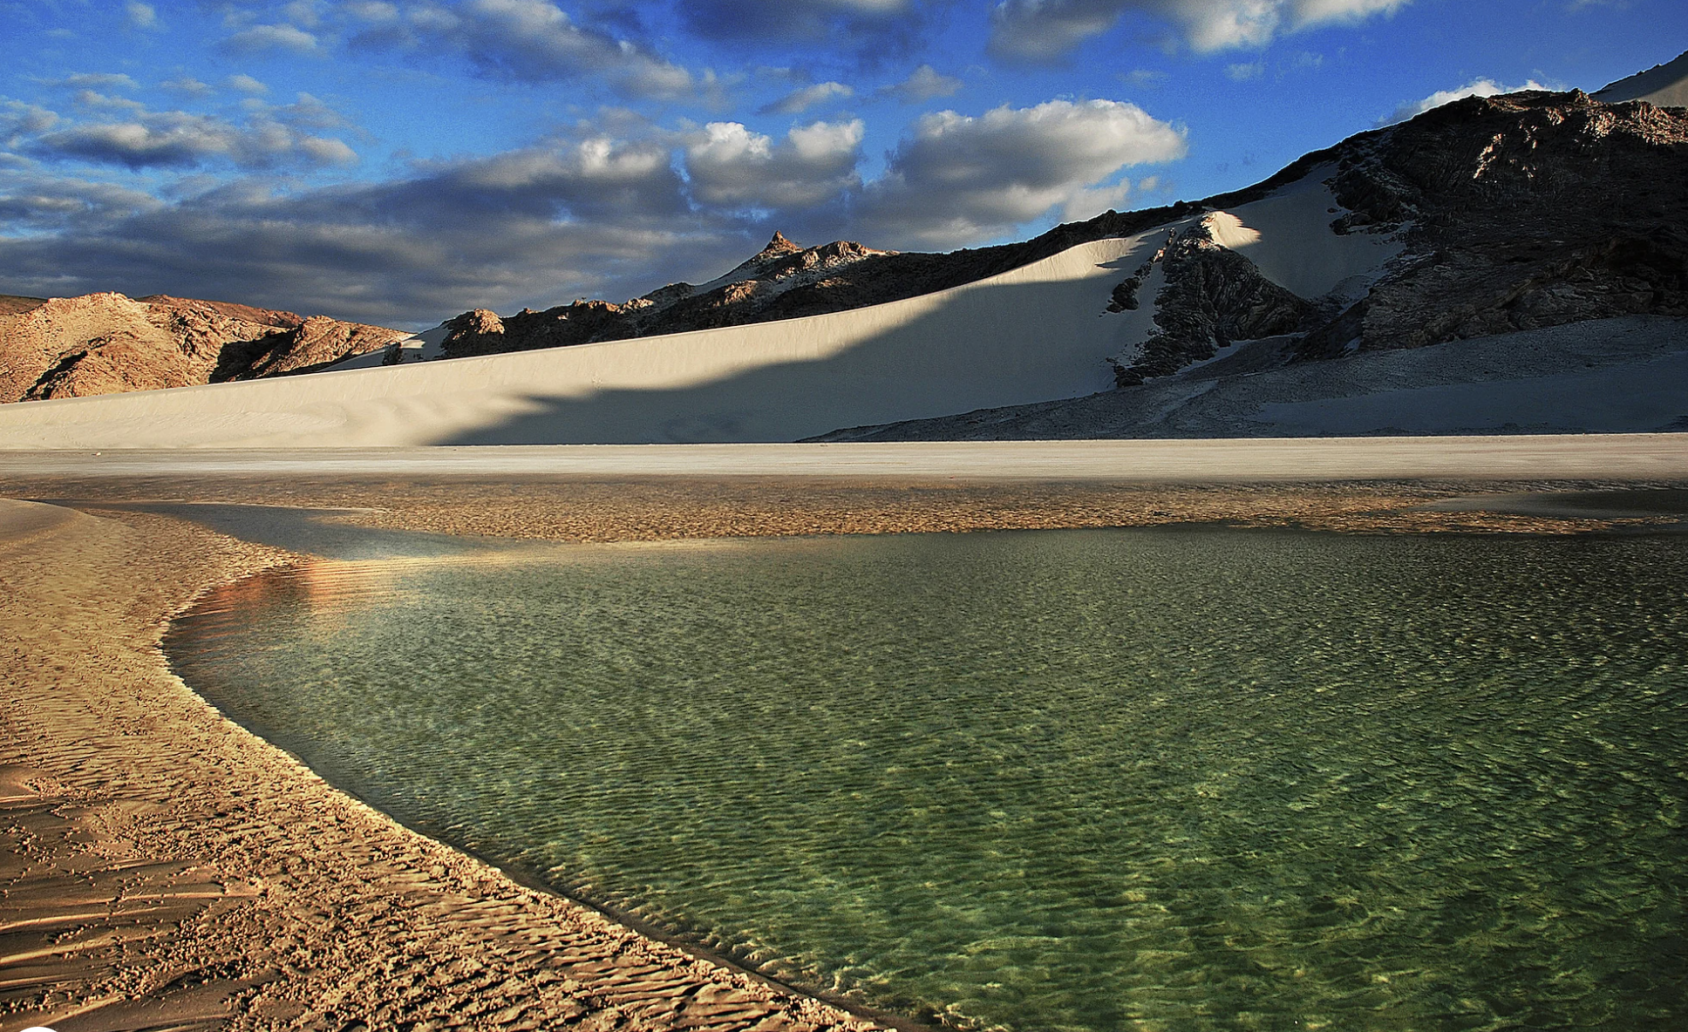 An image of a body of water on sand near mountains in the background.